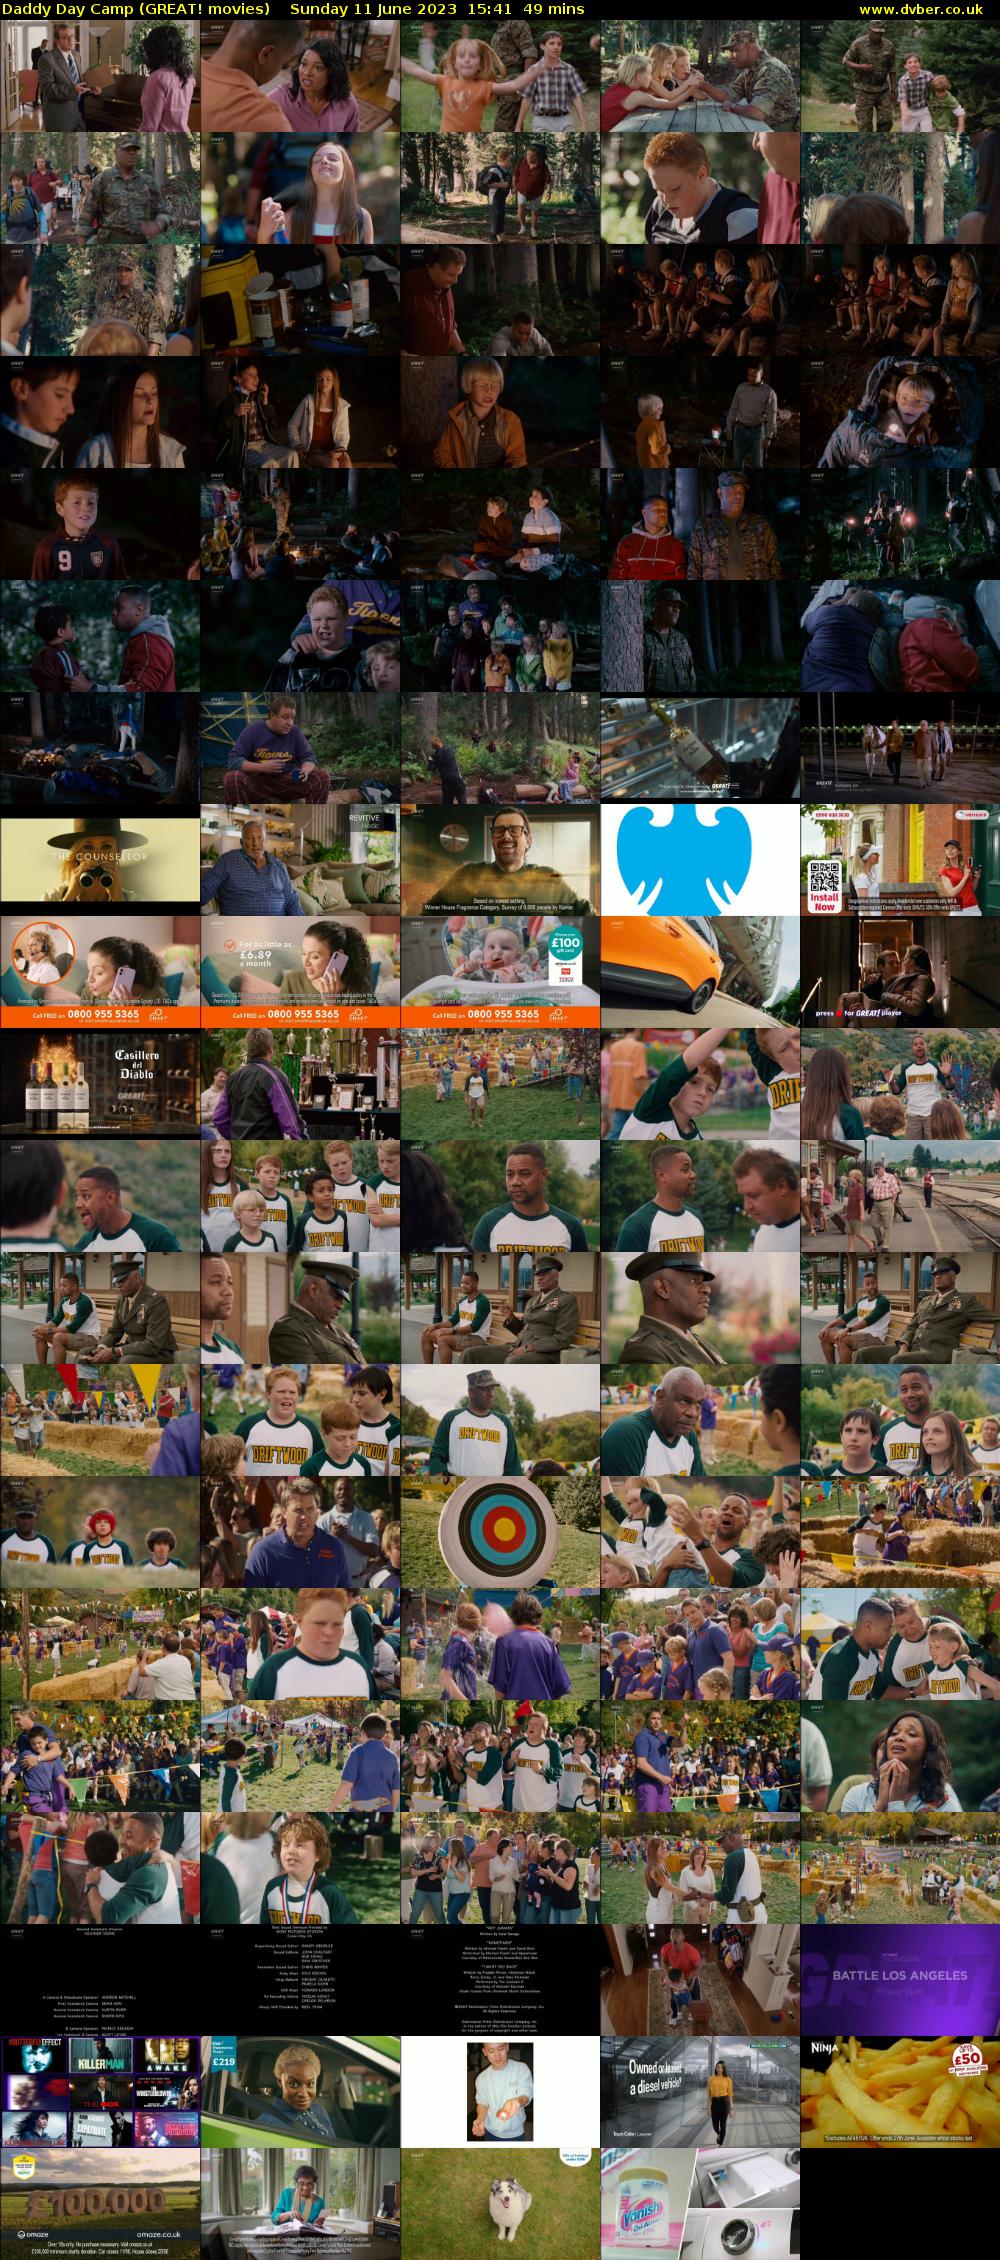 Daddy Day Camp (GREAT! movies) Sunday 11 June 2023 15:41 - 16:30